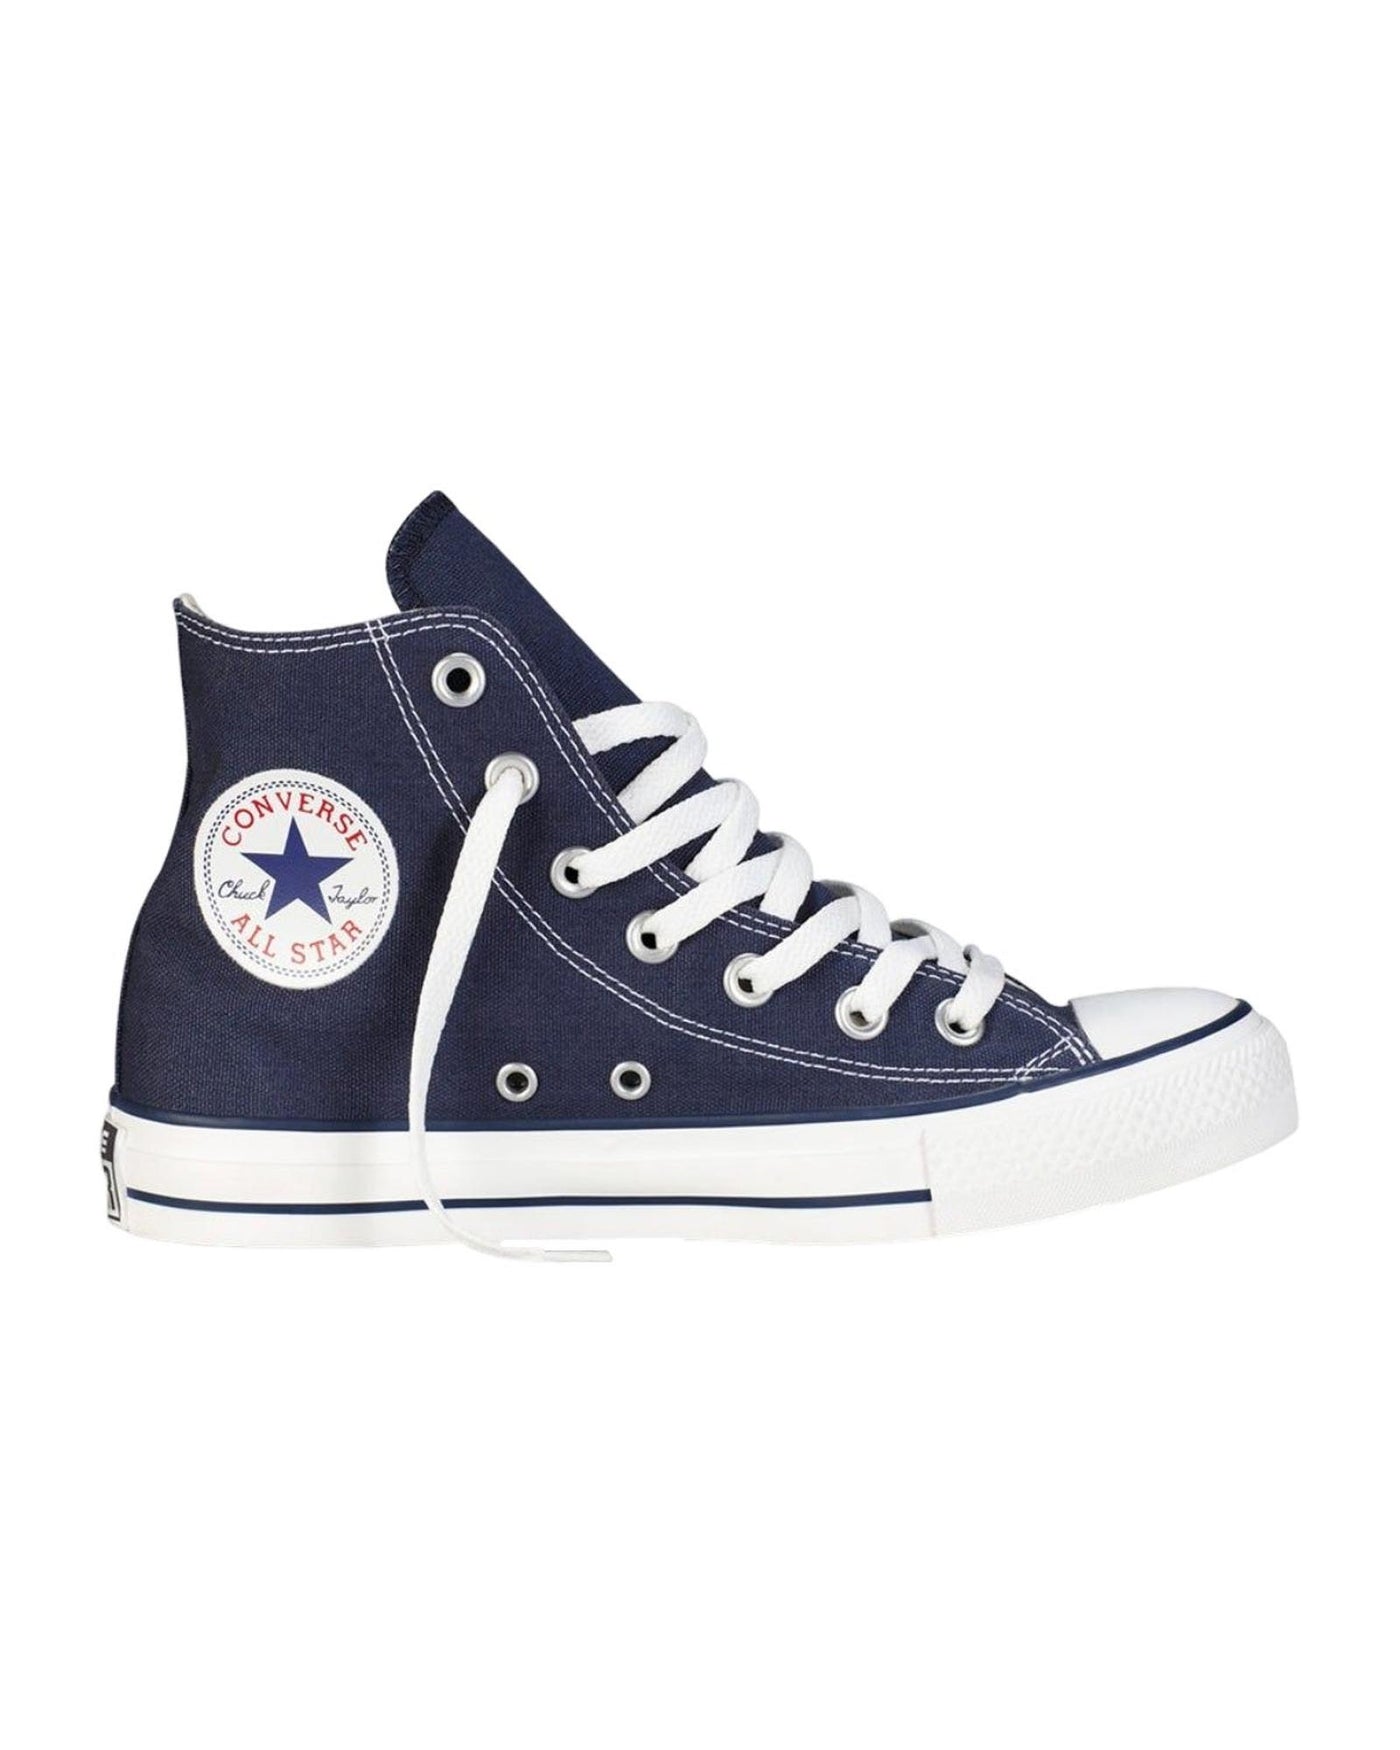 Classic Canvas High-Top Sneaker - 9 US